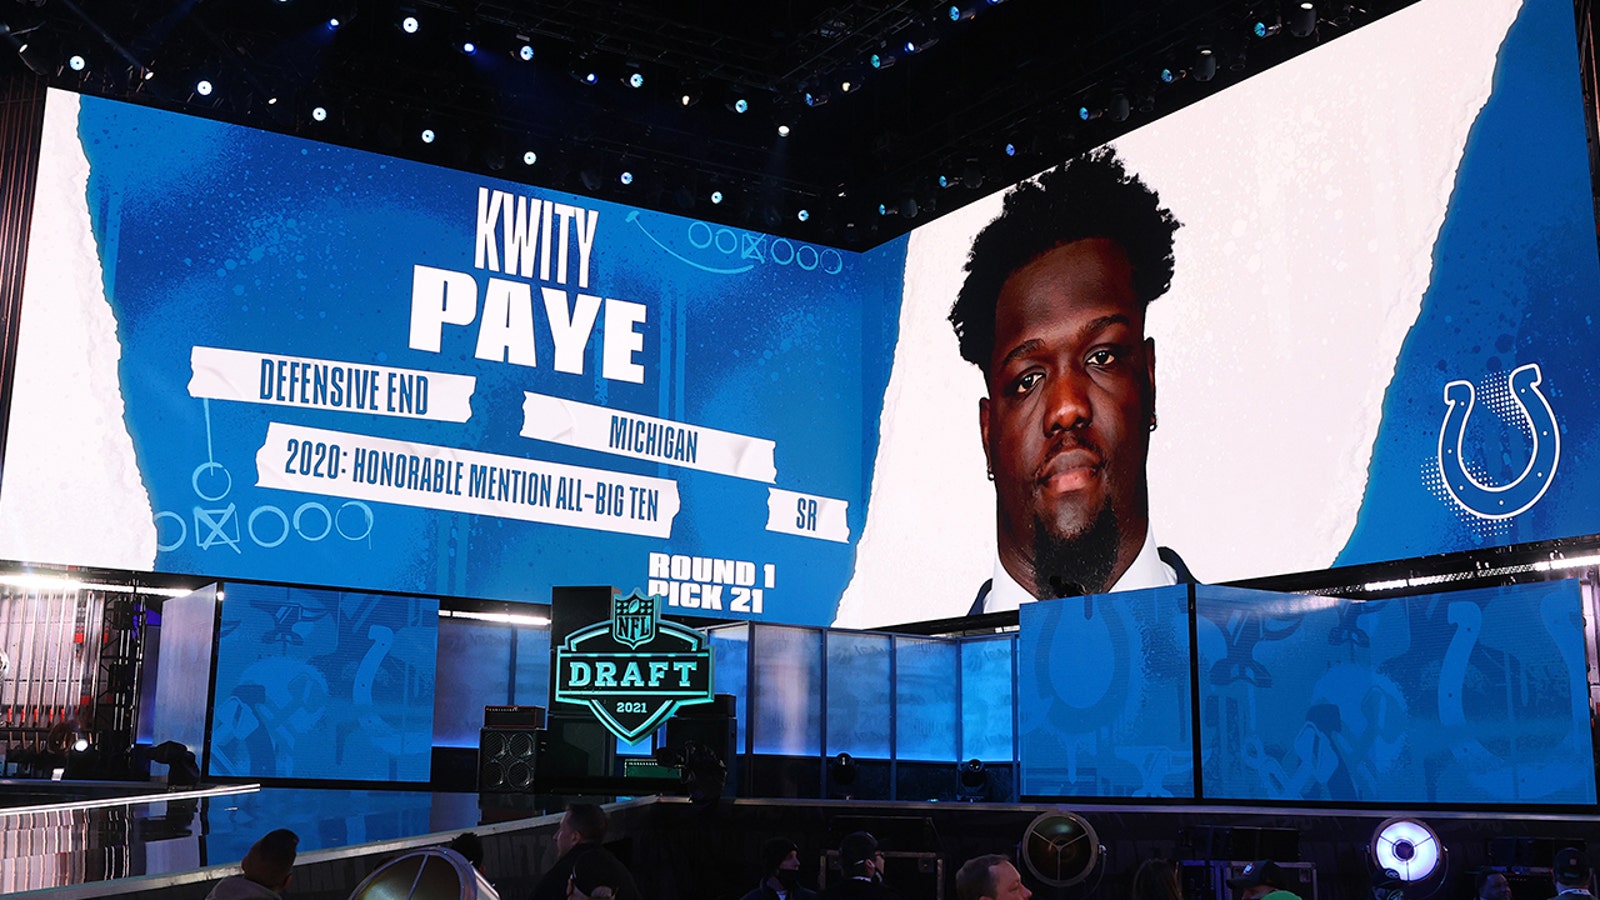 The Indianapolis Colts picked stand-out edge rusher Kwity Paye out of Michigan with the 21st pick in the draft.